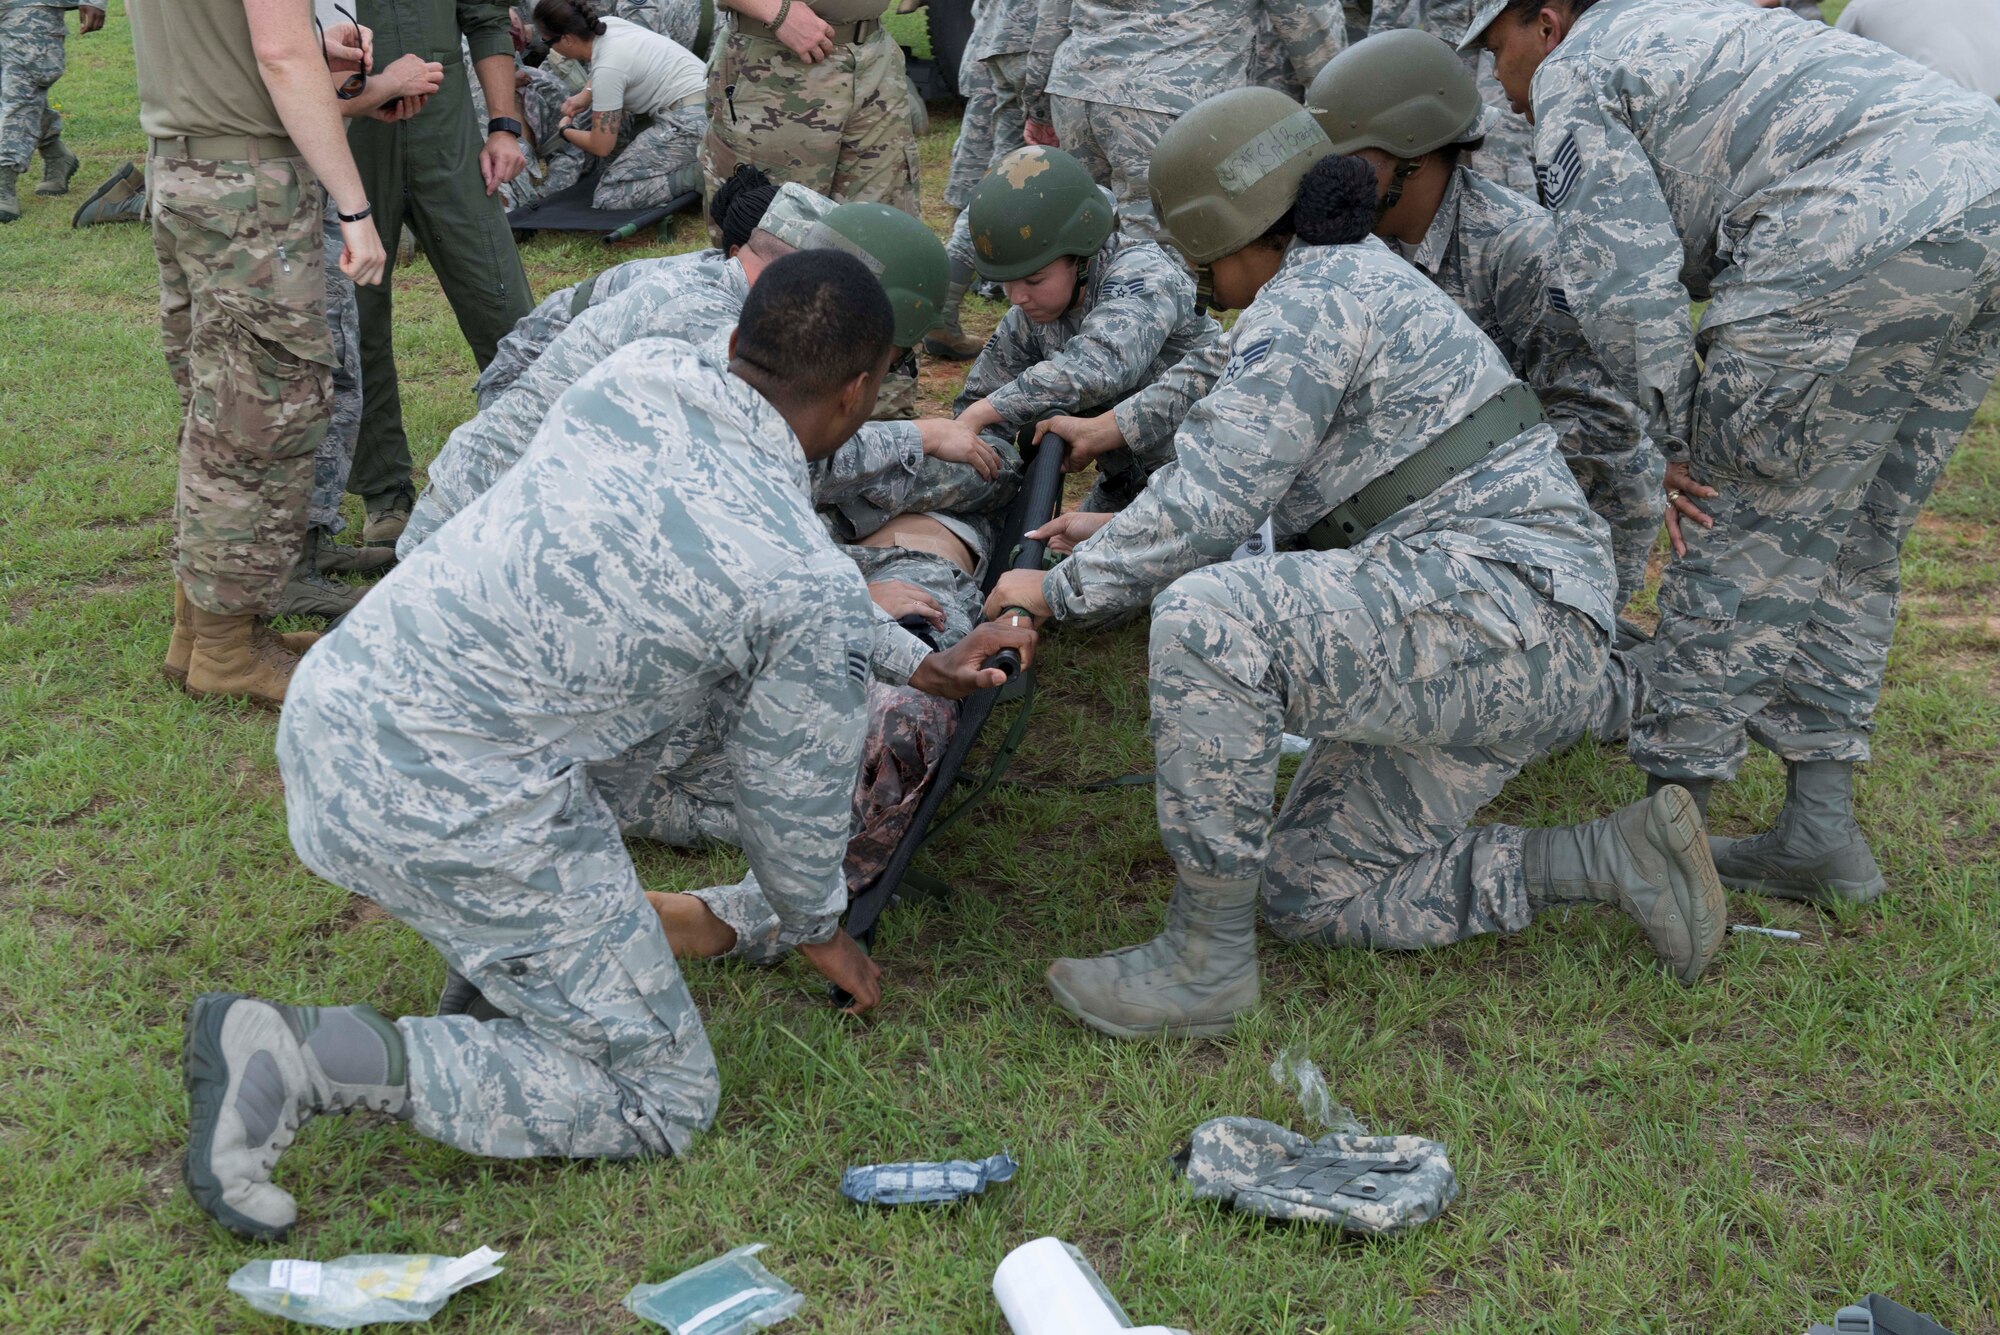 U.S. Airmen assigned to the 20th Medical Group place a simulated patient on a litter during an exercise at Shaw Air Force Base, S.C., Aug. 2, 2018.